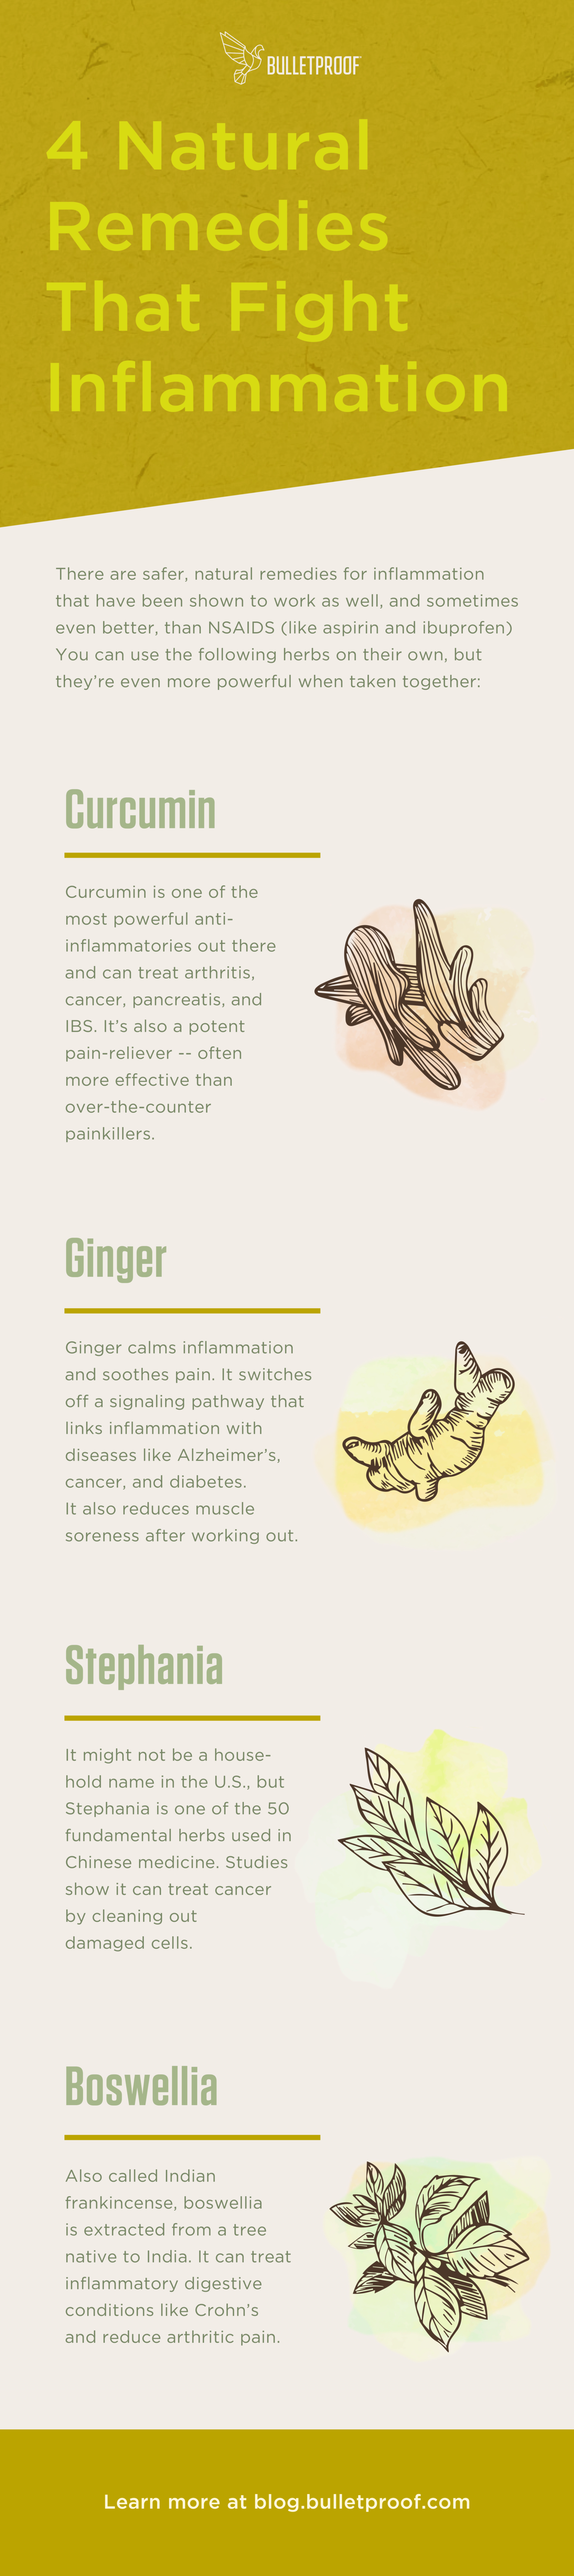 Natural remedies for inflammation reduction